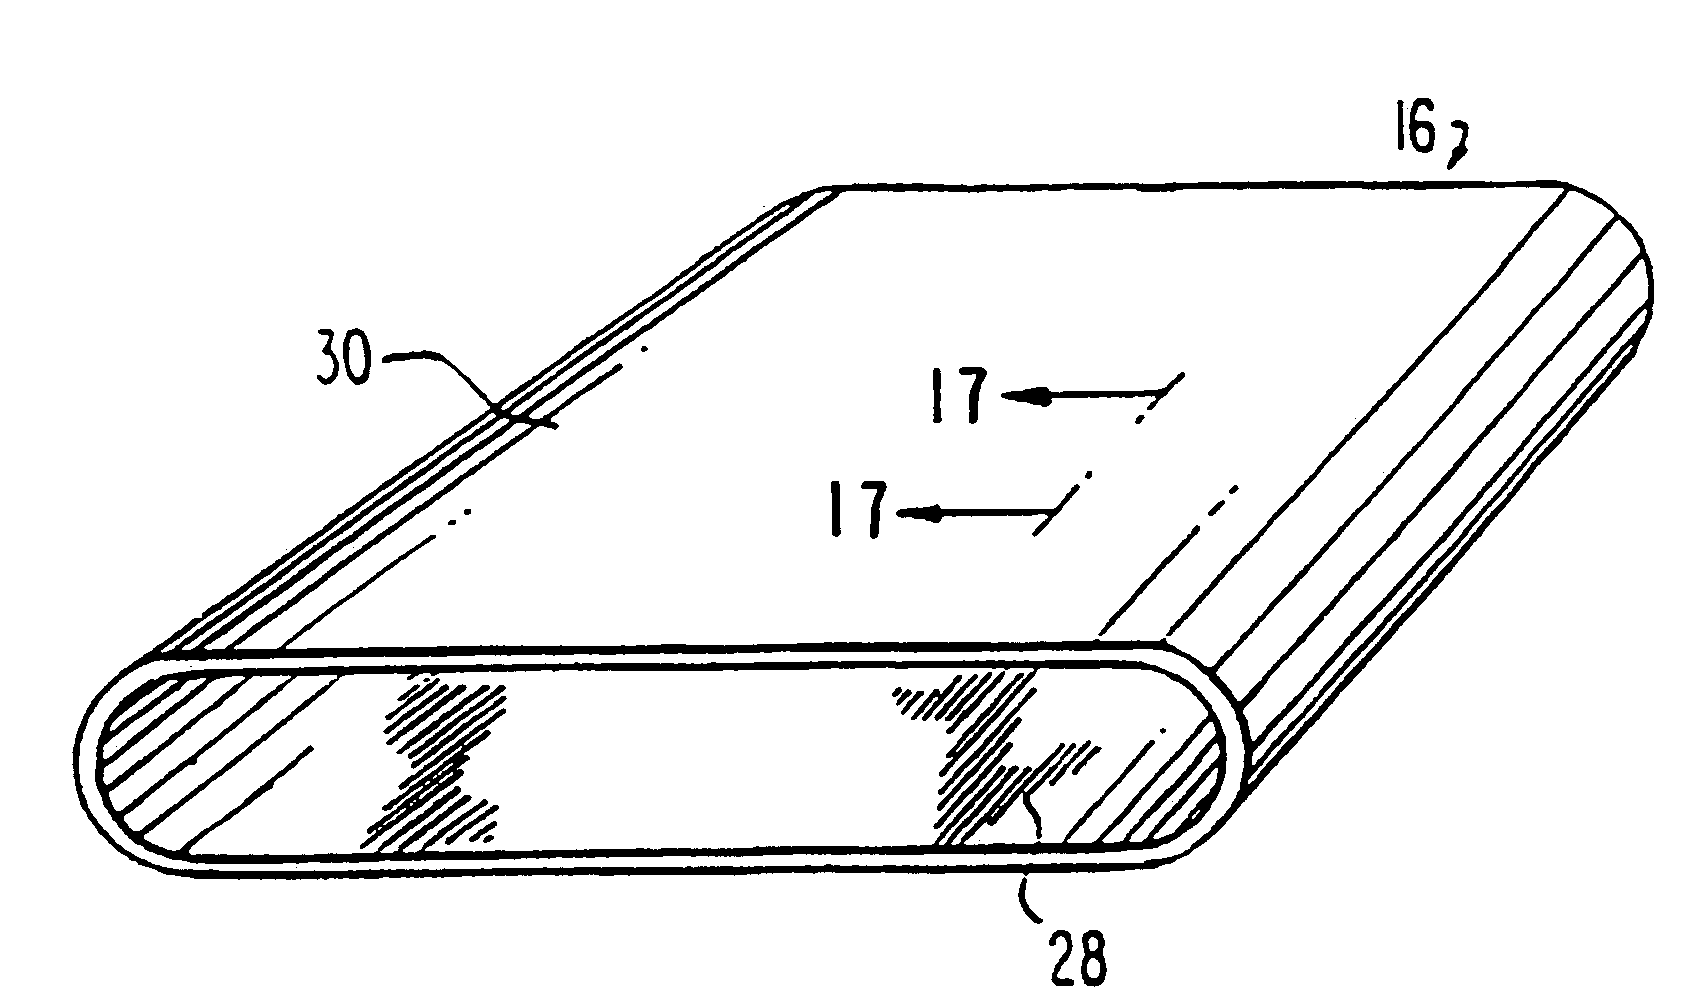 Belts and roll coverings having a nanocomposite coating